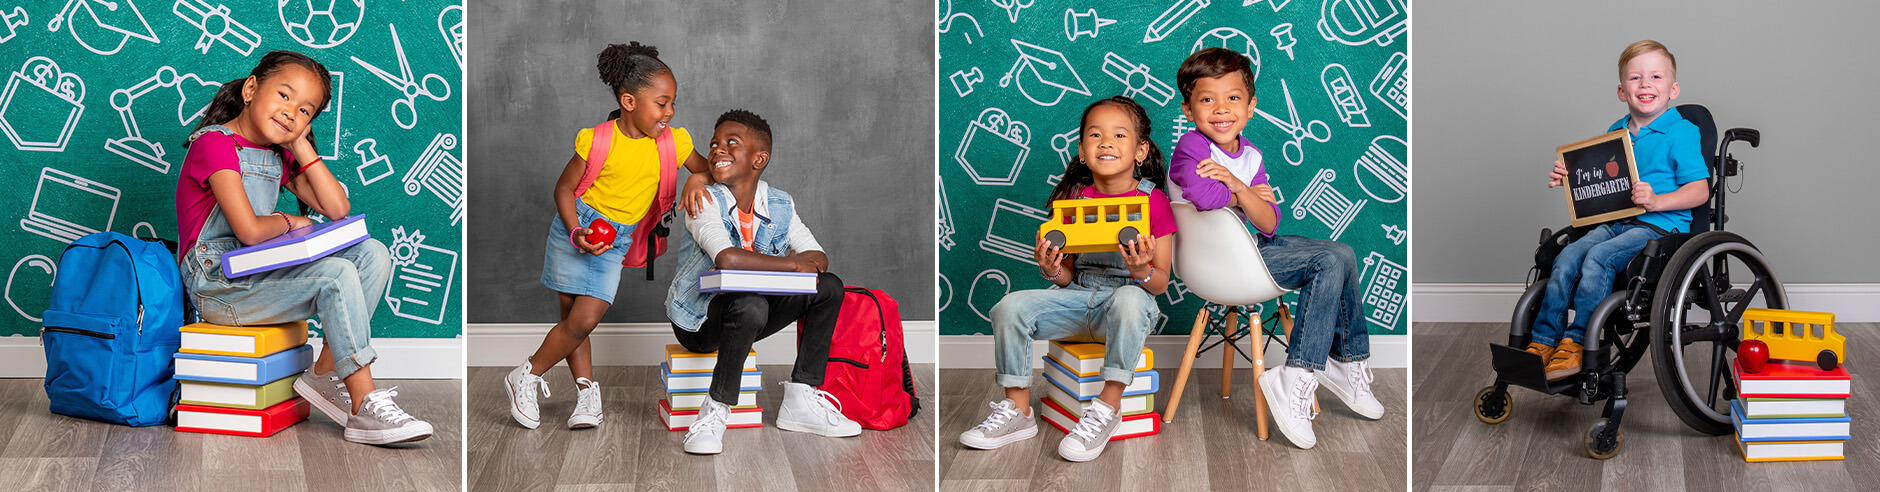 Capturing Memories: Back-to-School Photoshoot Ideas for Cherished Moments